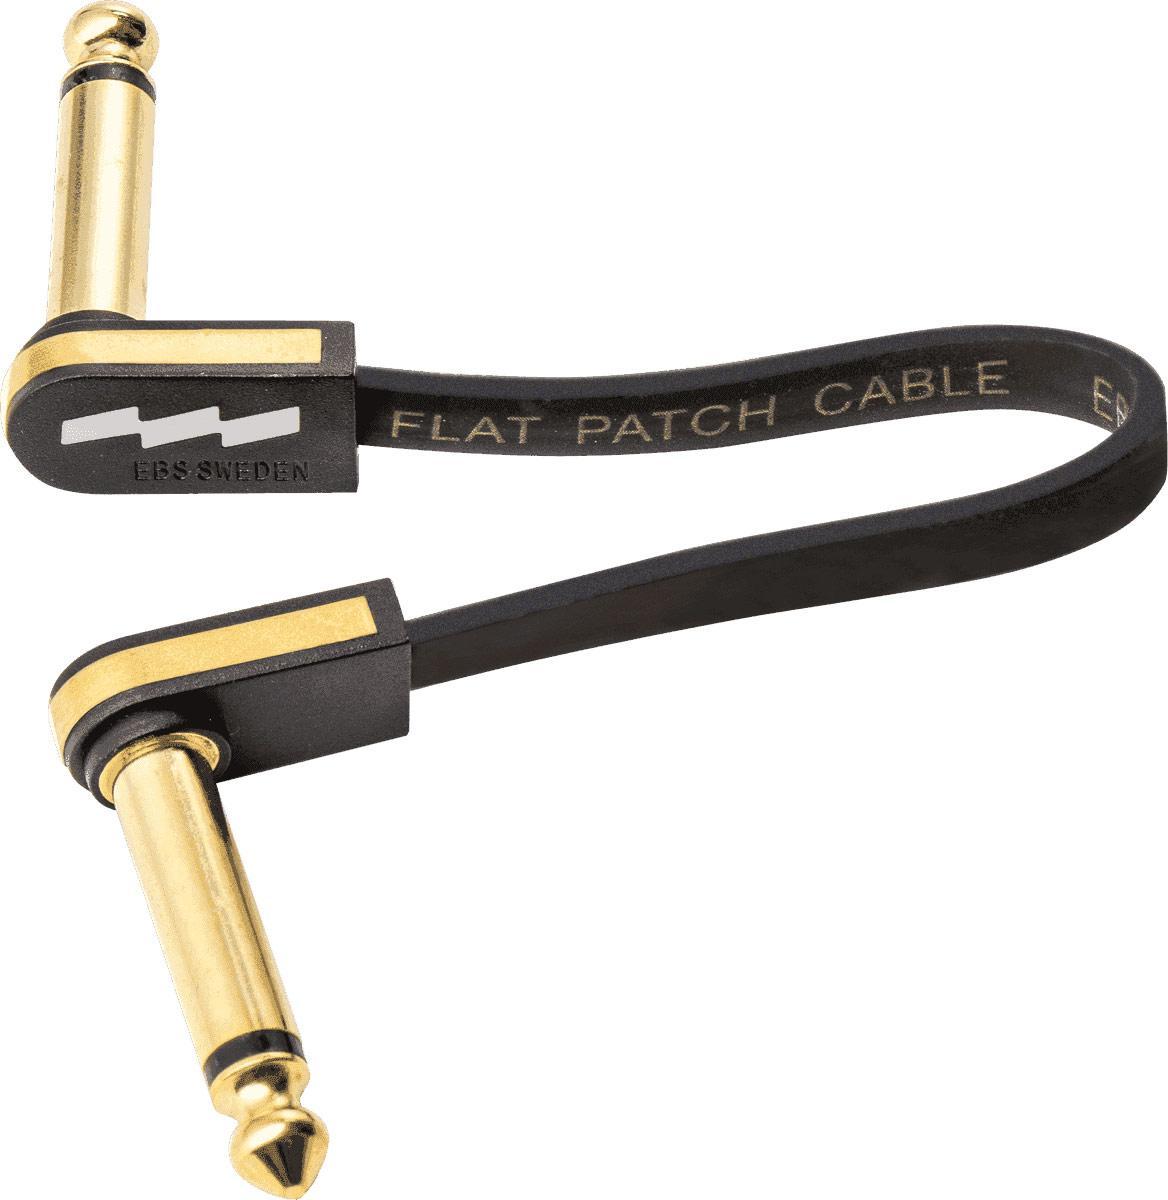 Patch Ebs                            PG-10 Premium Gold Flat Patch Cable